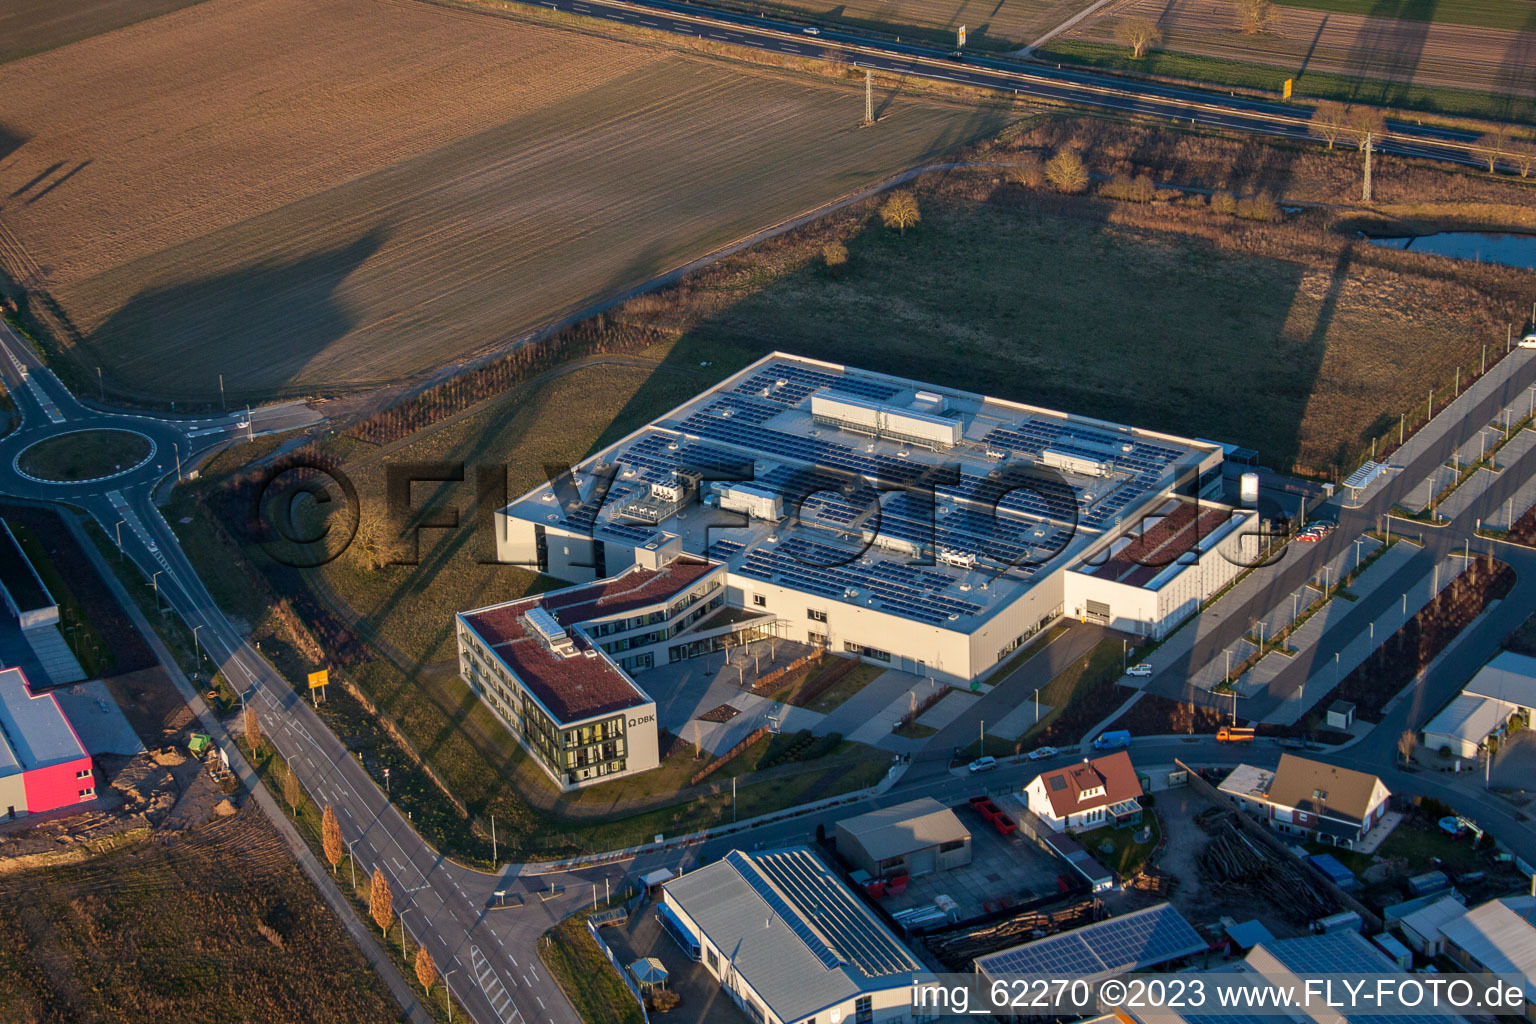 Aerial photograpy of North industrial area in Rülzheim in the state Rhineland-Palatinate, Germany